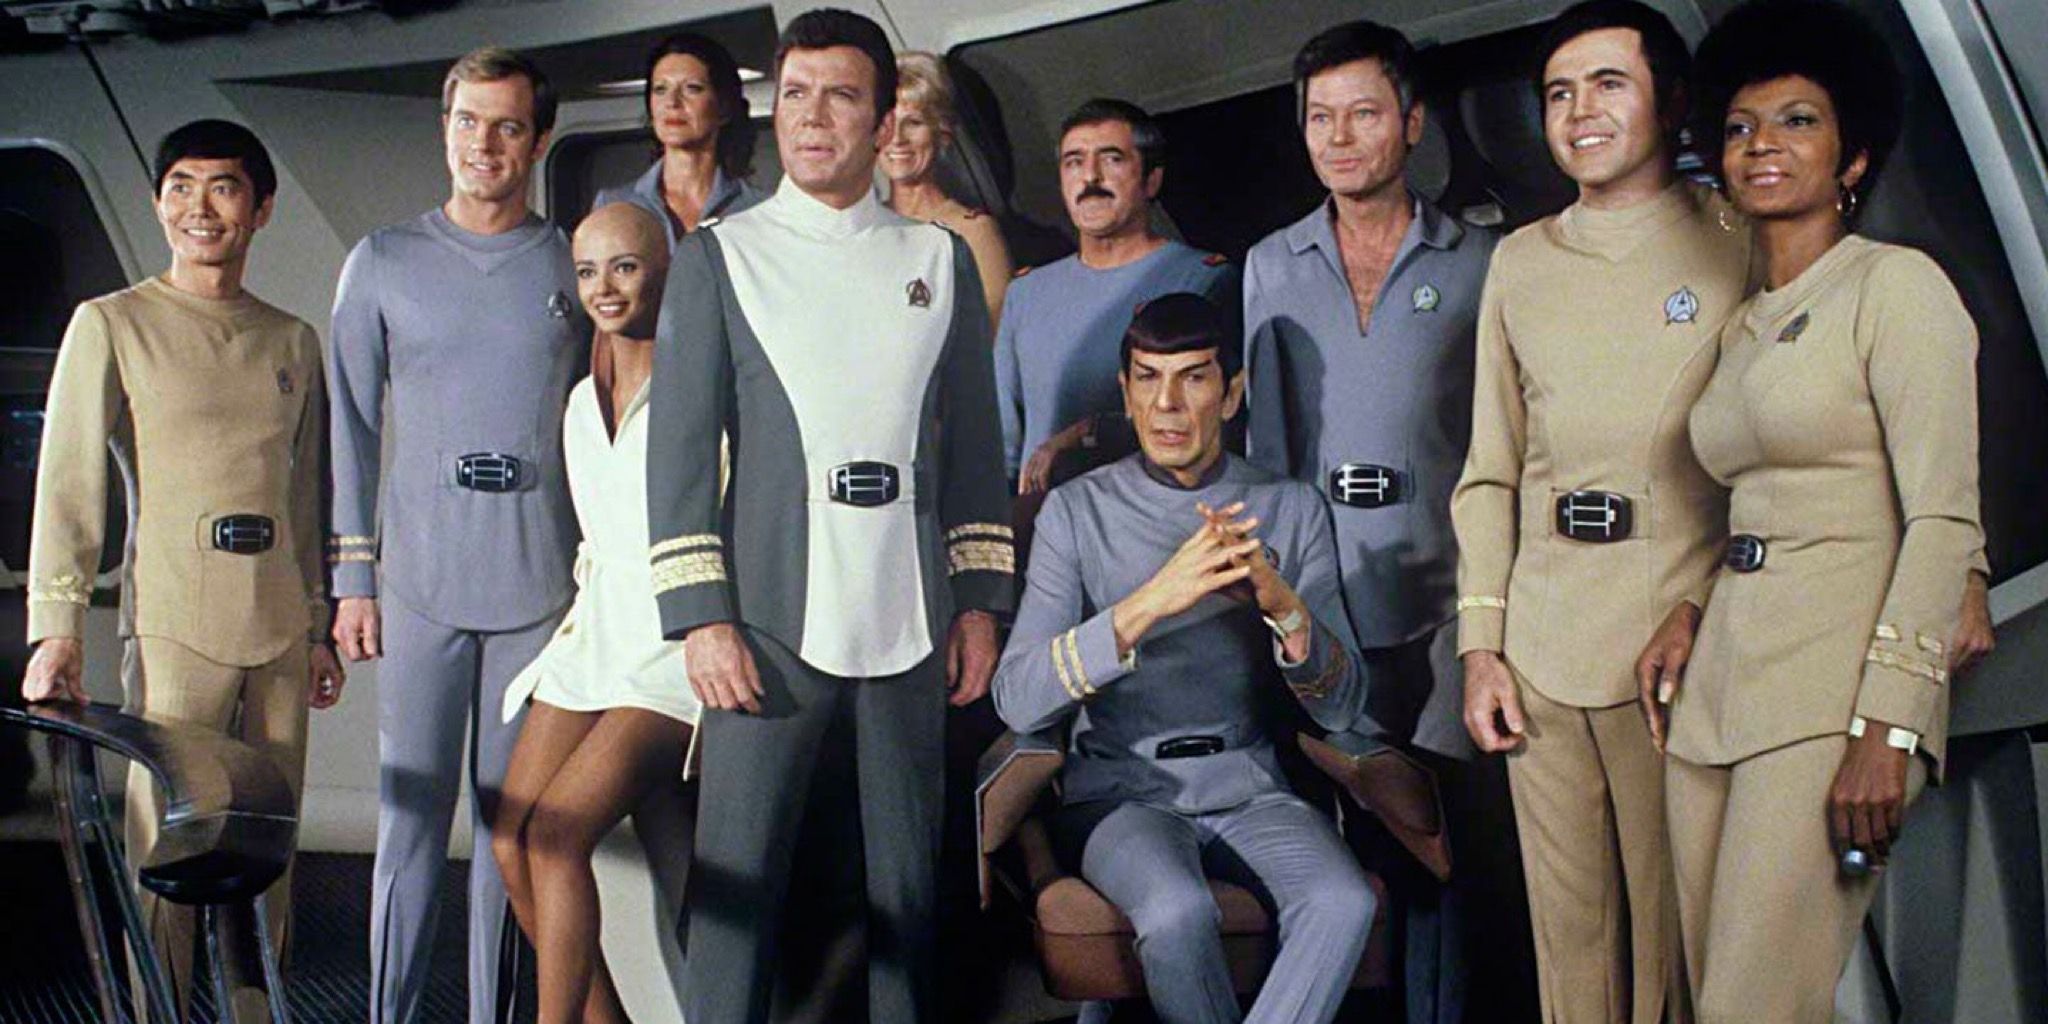 A still of the Enterprise group taking a photo from Star Trek: The Motion Picture (1979)